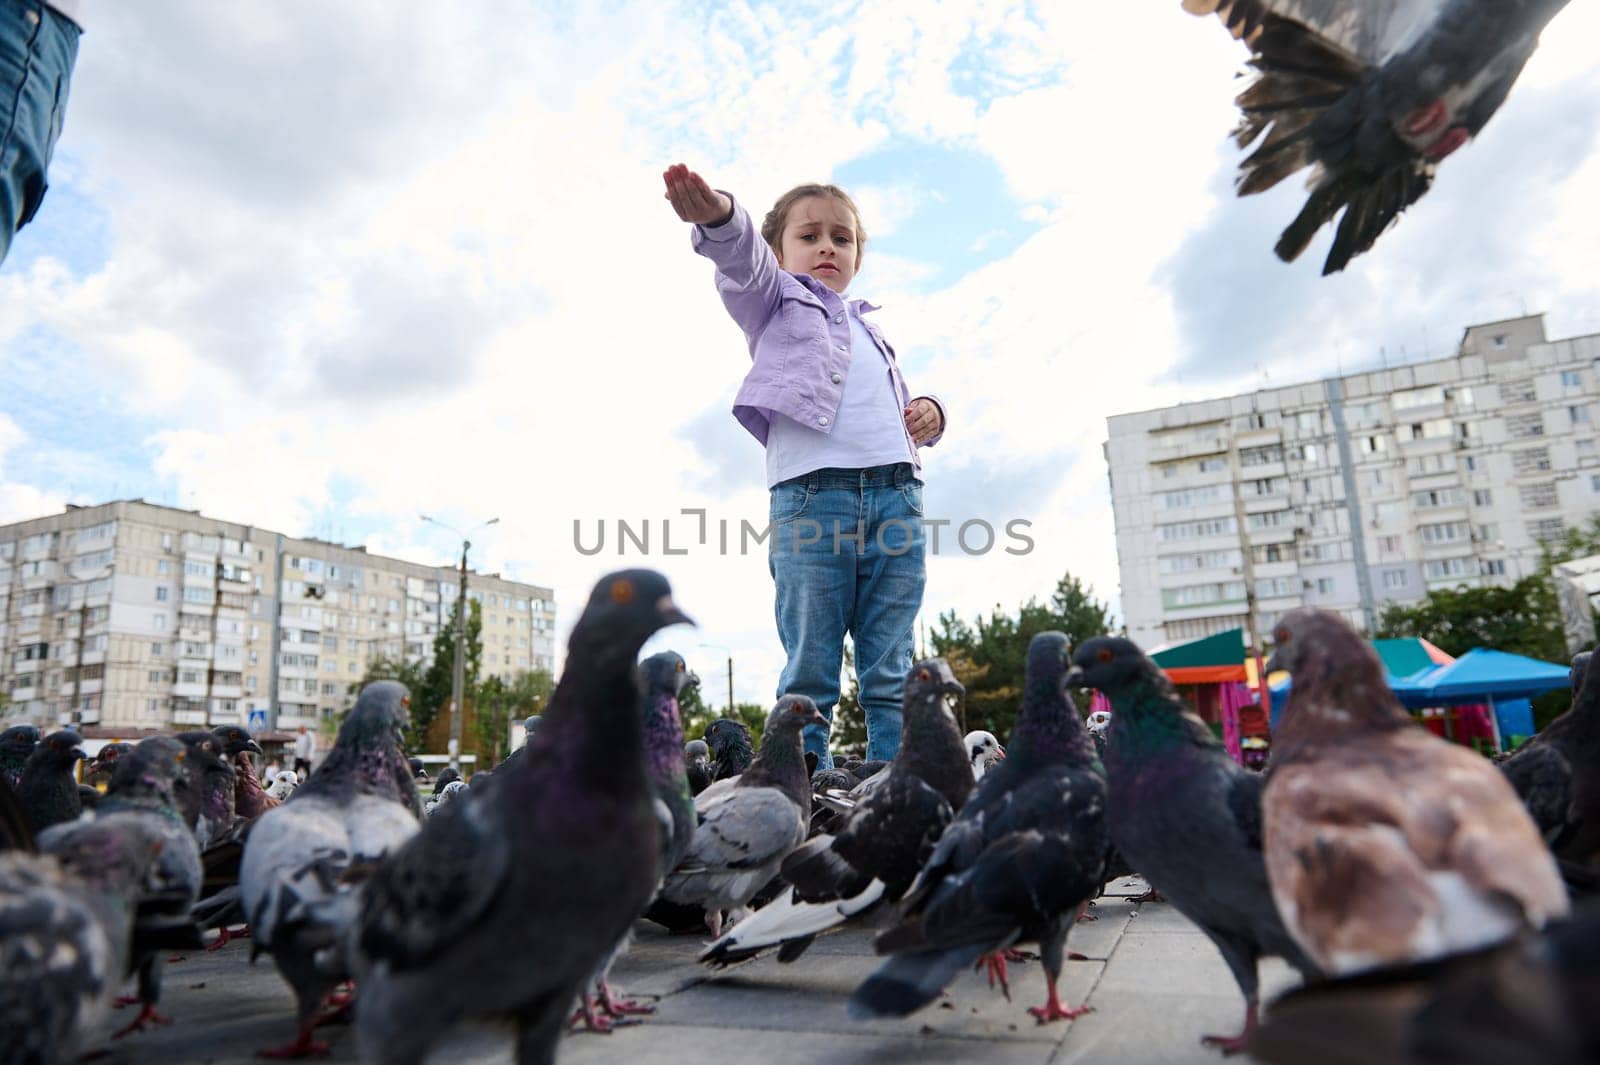 View from the bottom to a kind little child girl standing with bird seeds in her outstretched hand and feeding rock pigeons in the park square. The concept of kindness, love and care for animals.